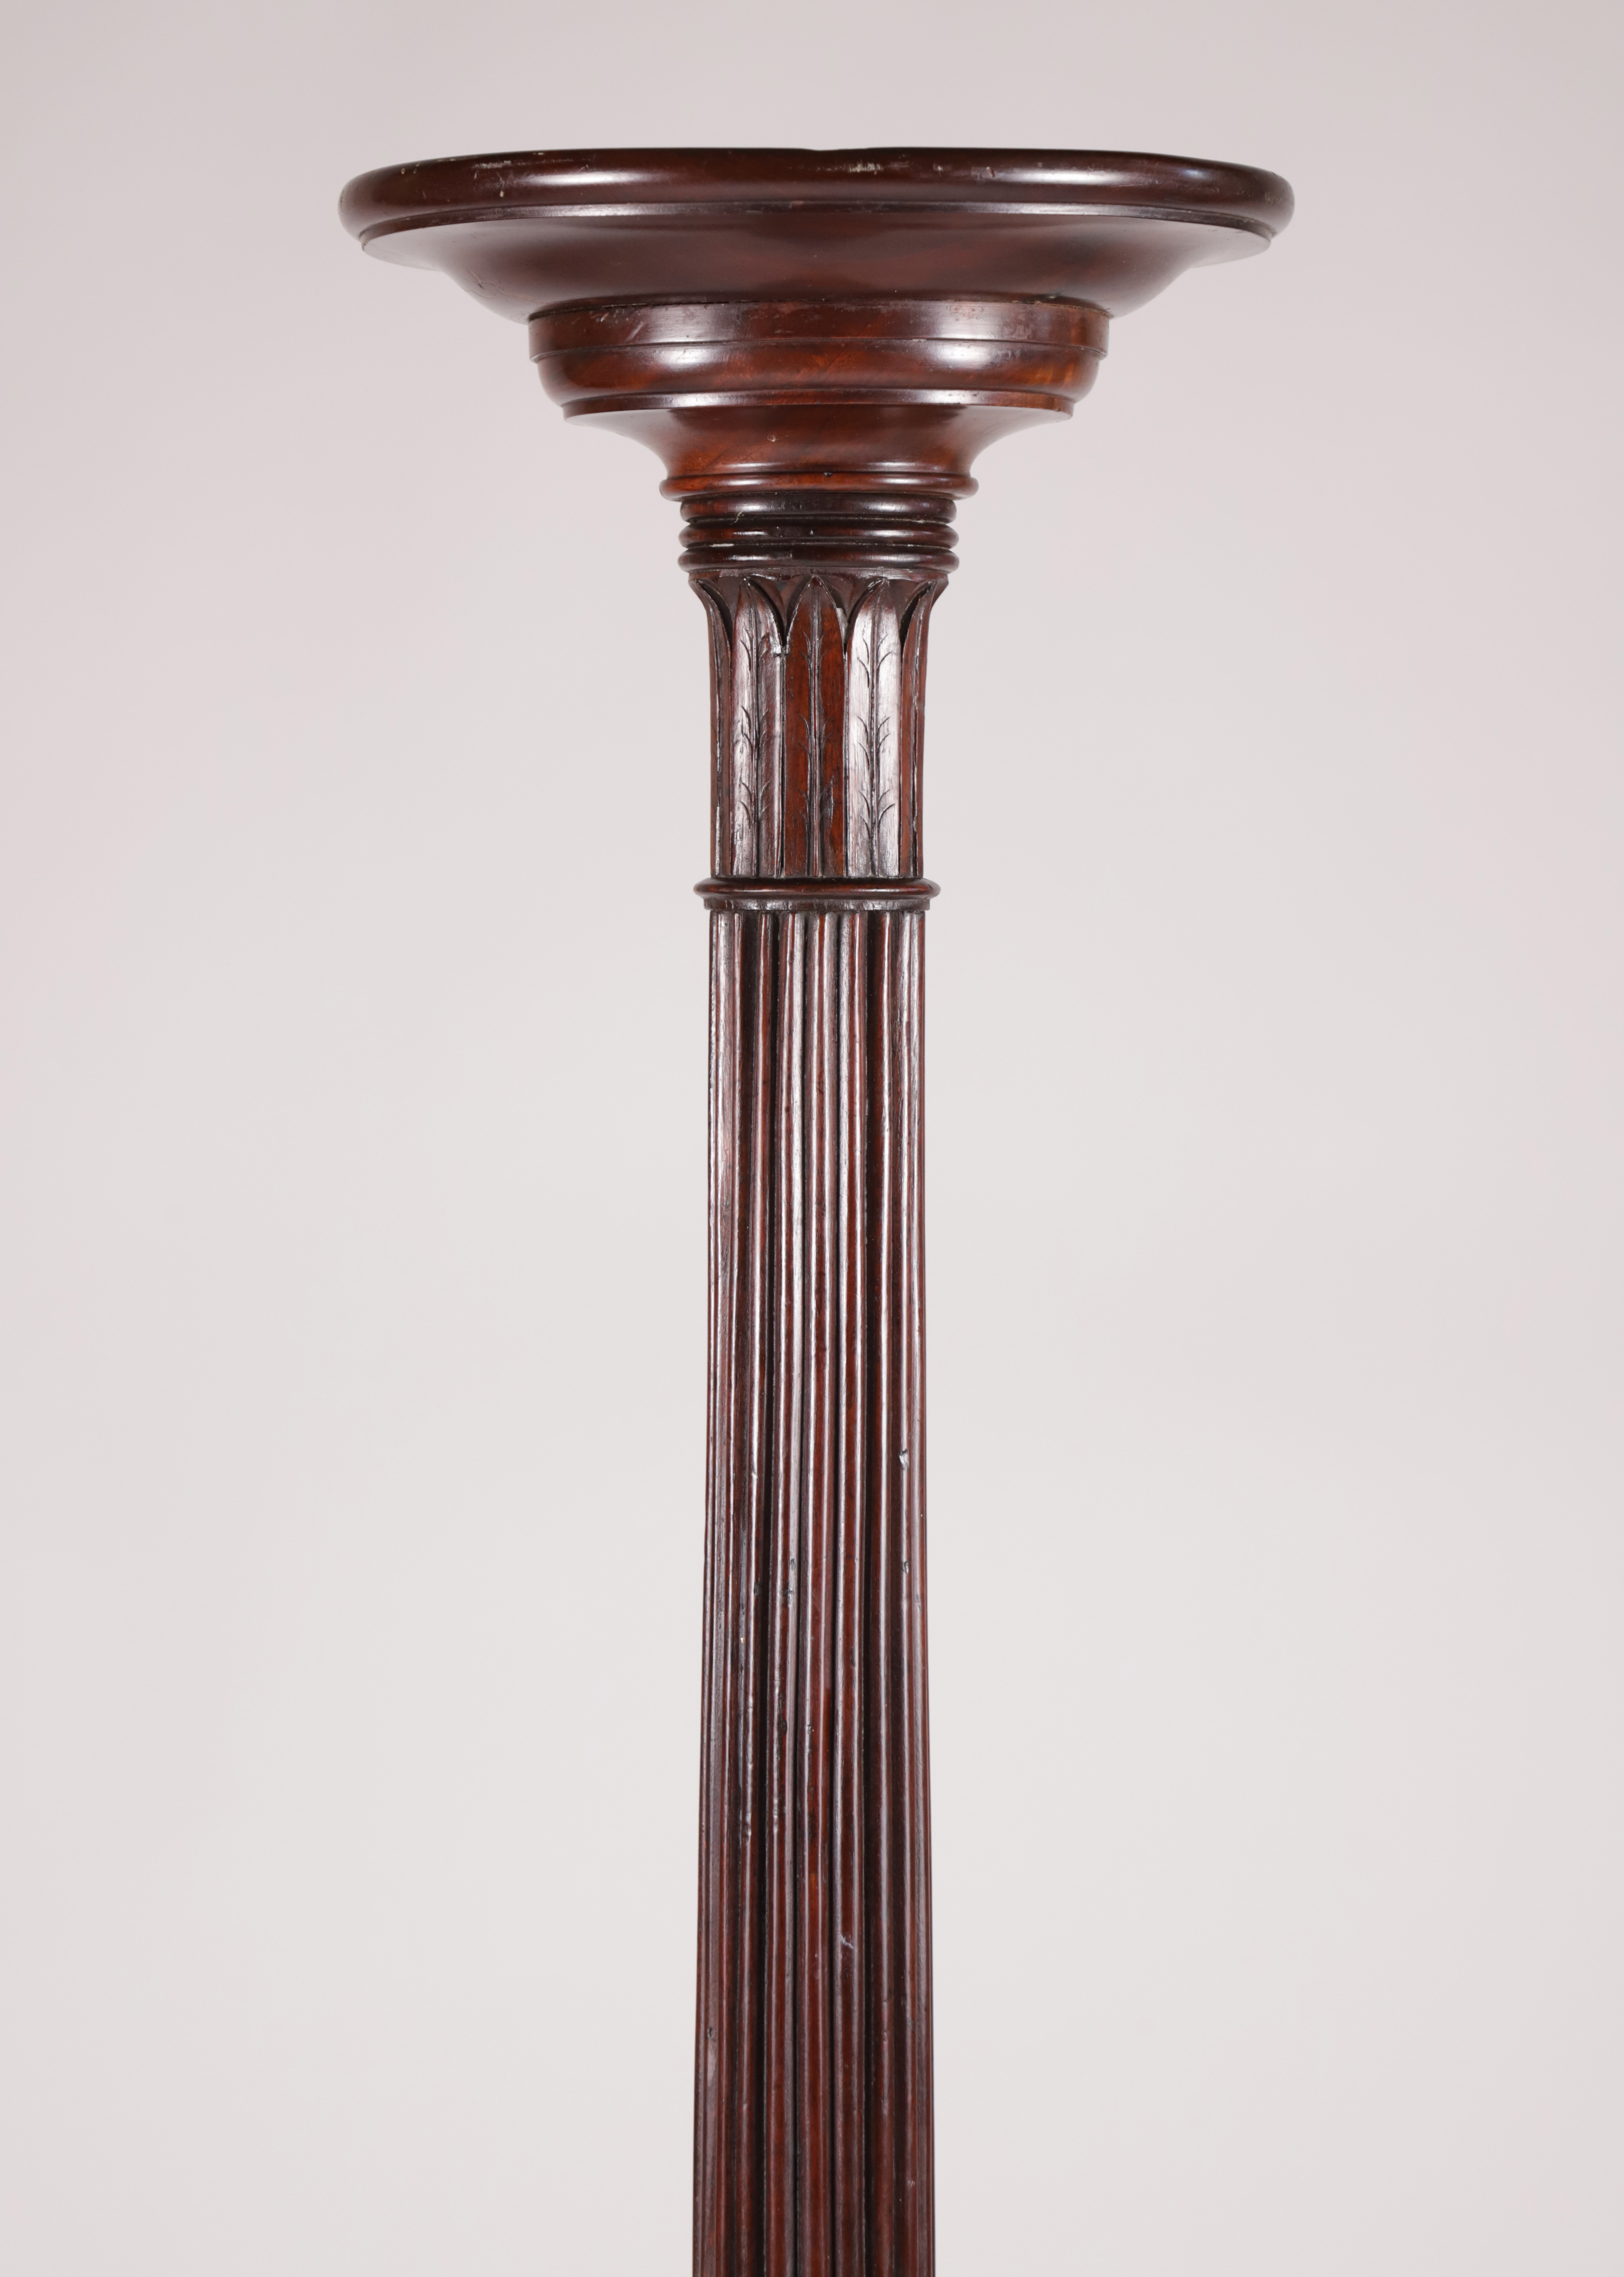 Antique Tall Mahogany Reeded Column Plant Stand